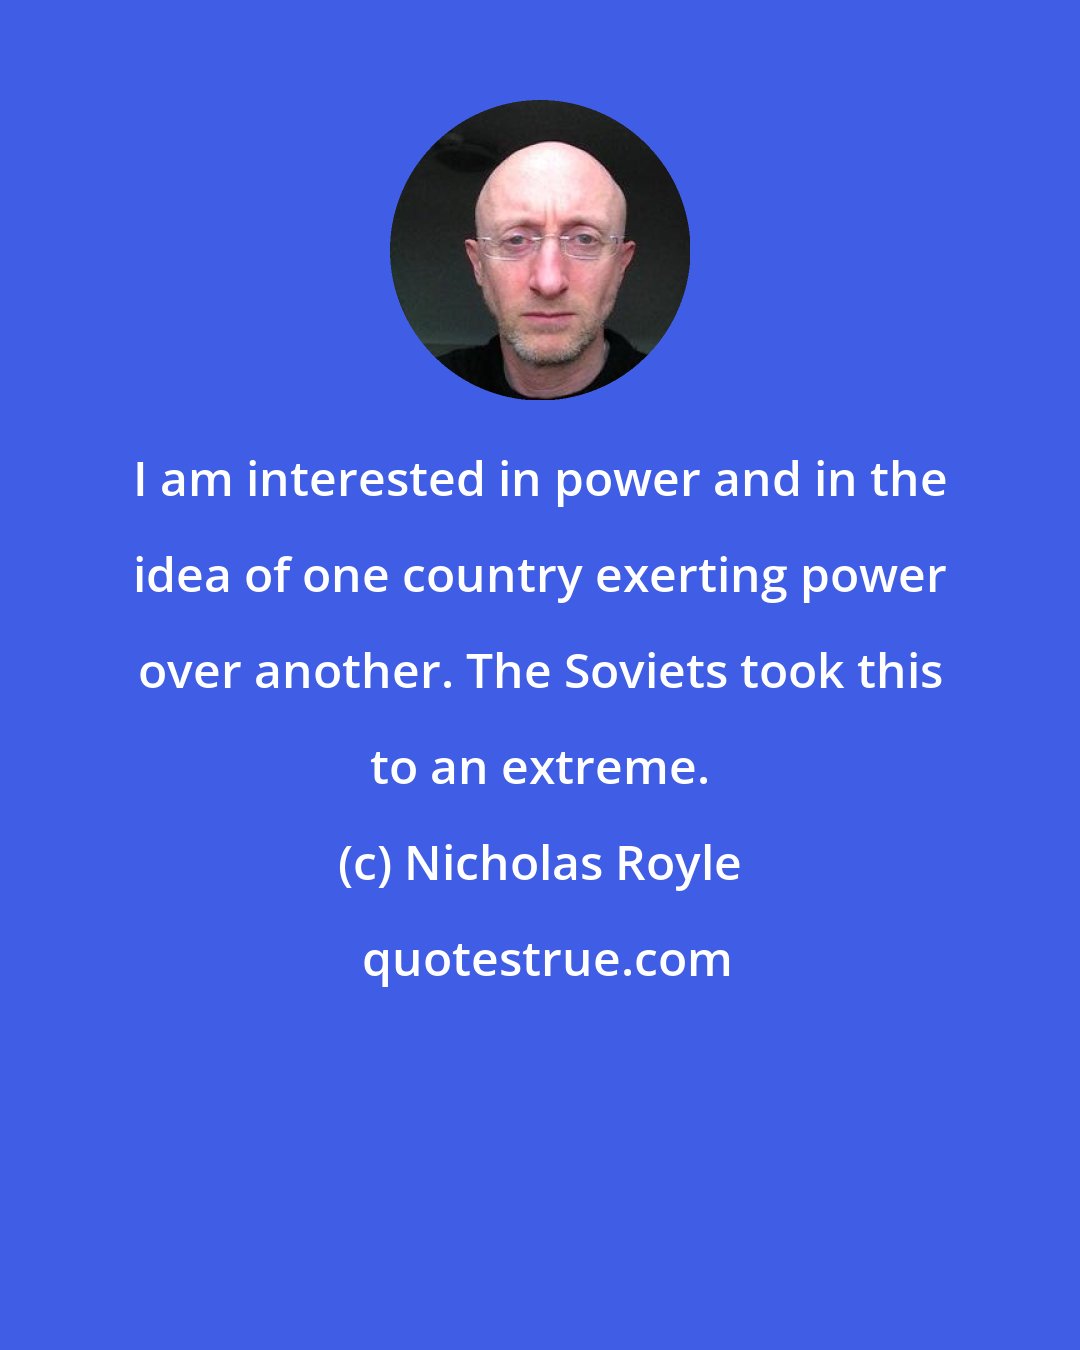 Nicholas Royle: I am interested in power and in the idea of one country exerting power over another. The Soviets took this to an extreme.